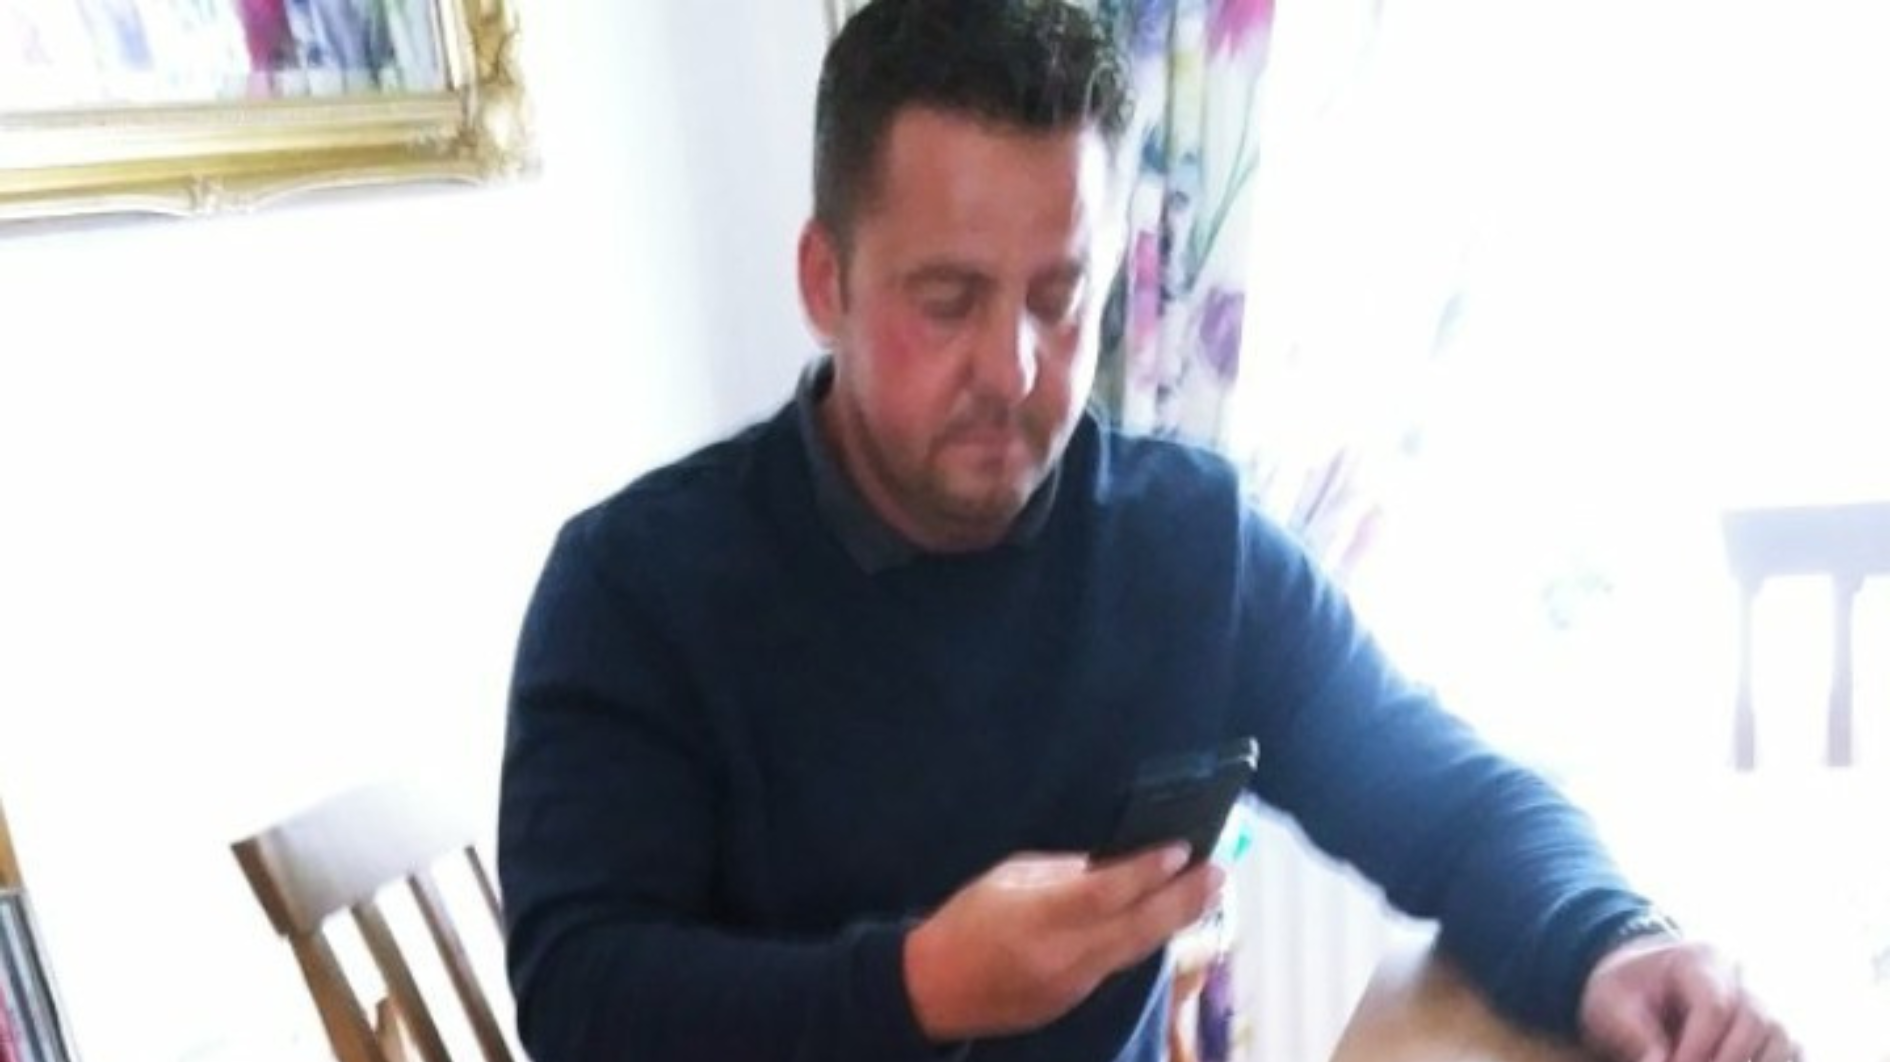 A man sat in a dining room on a chair with arms on the table looking at his phone